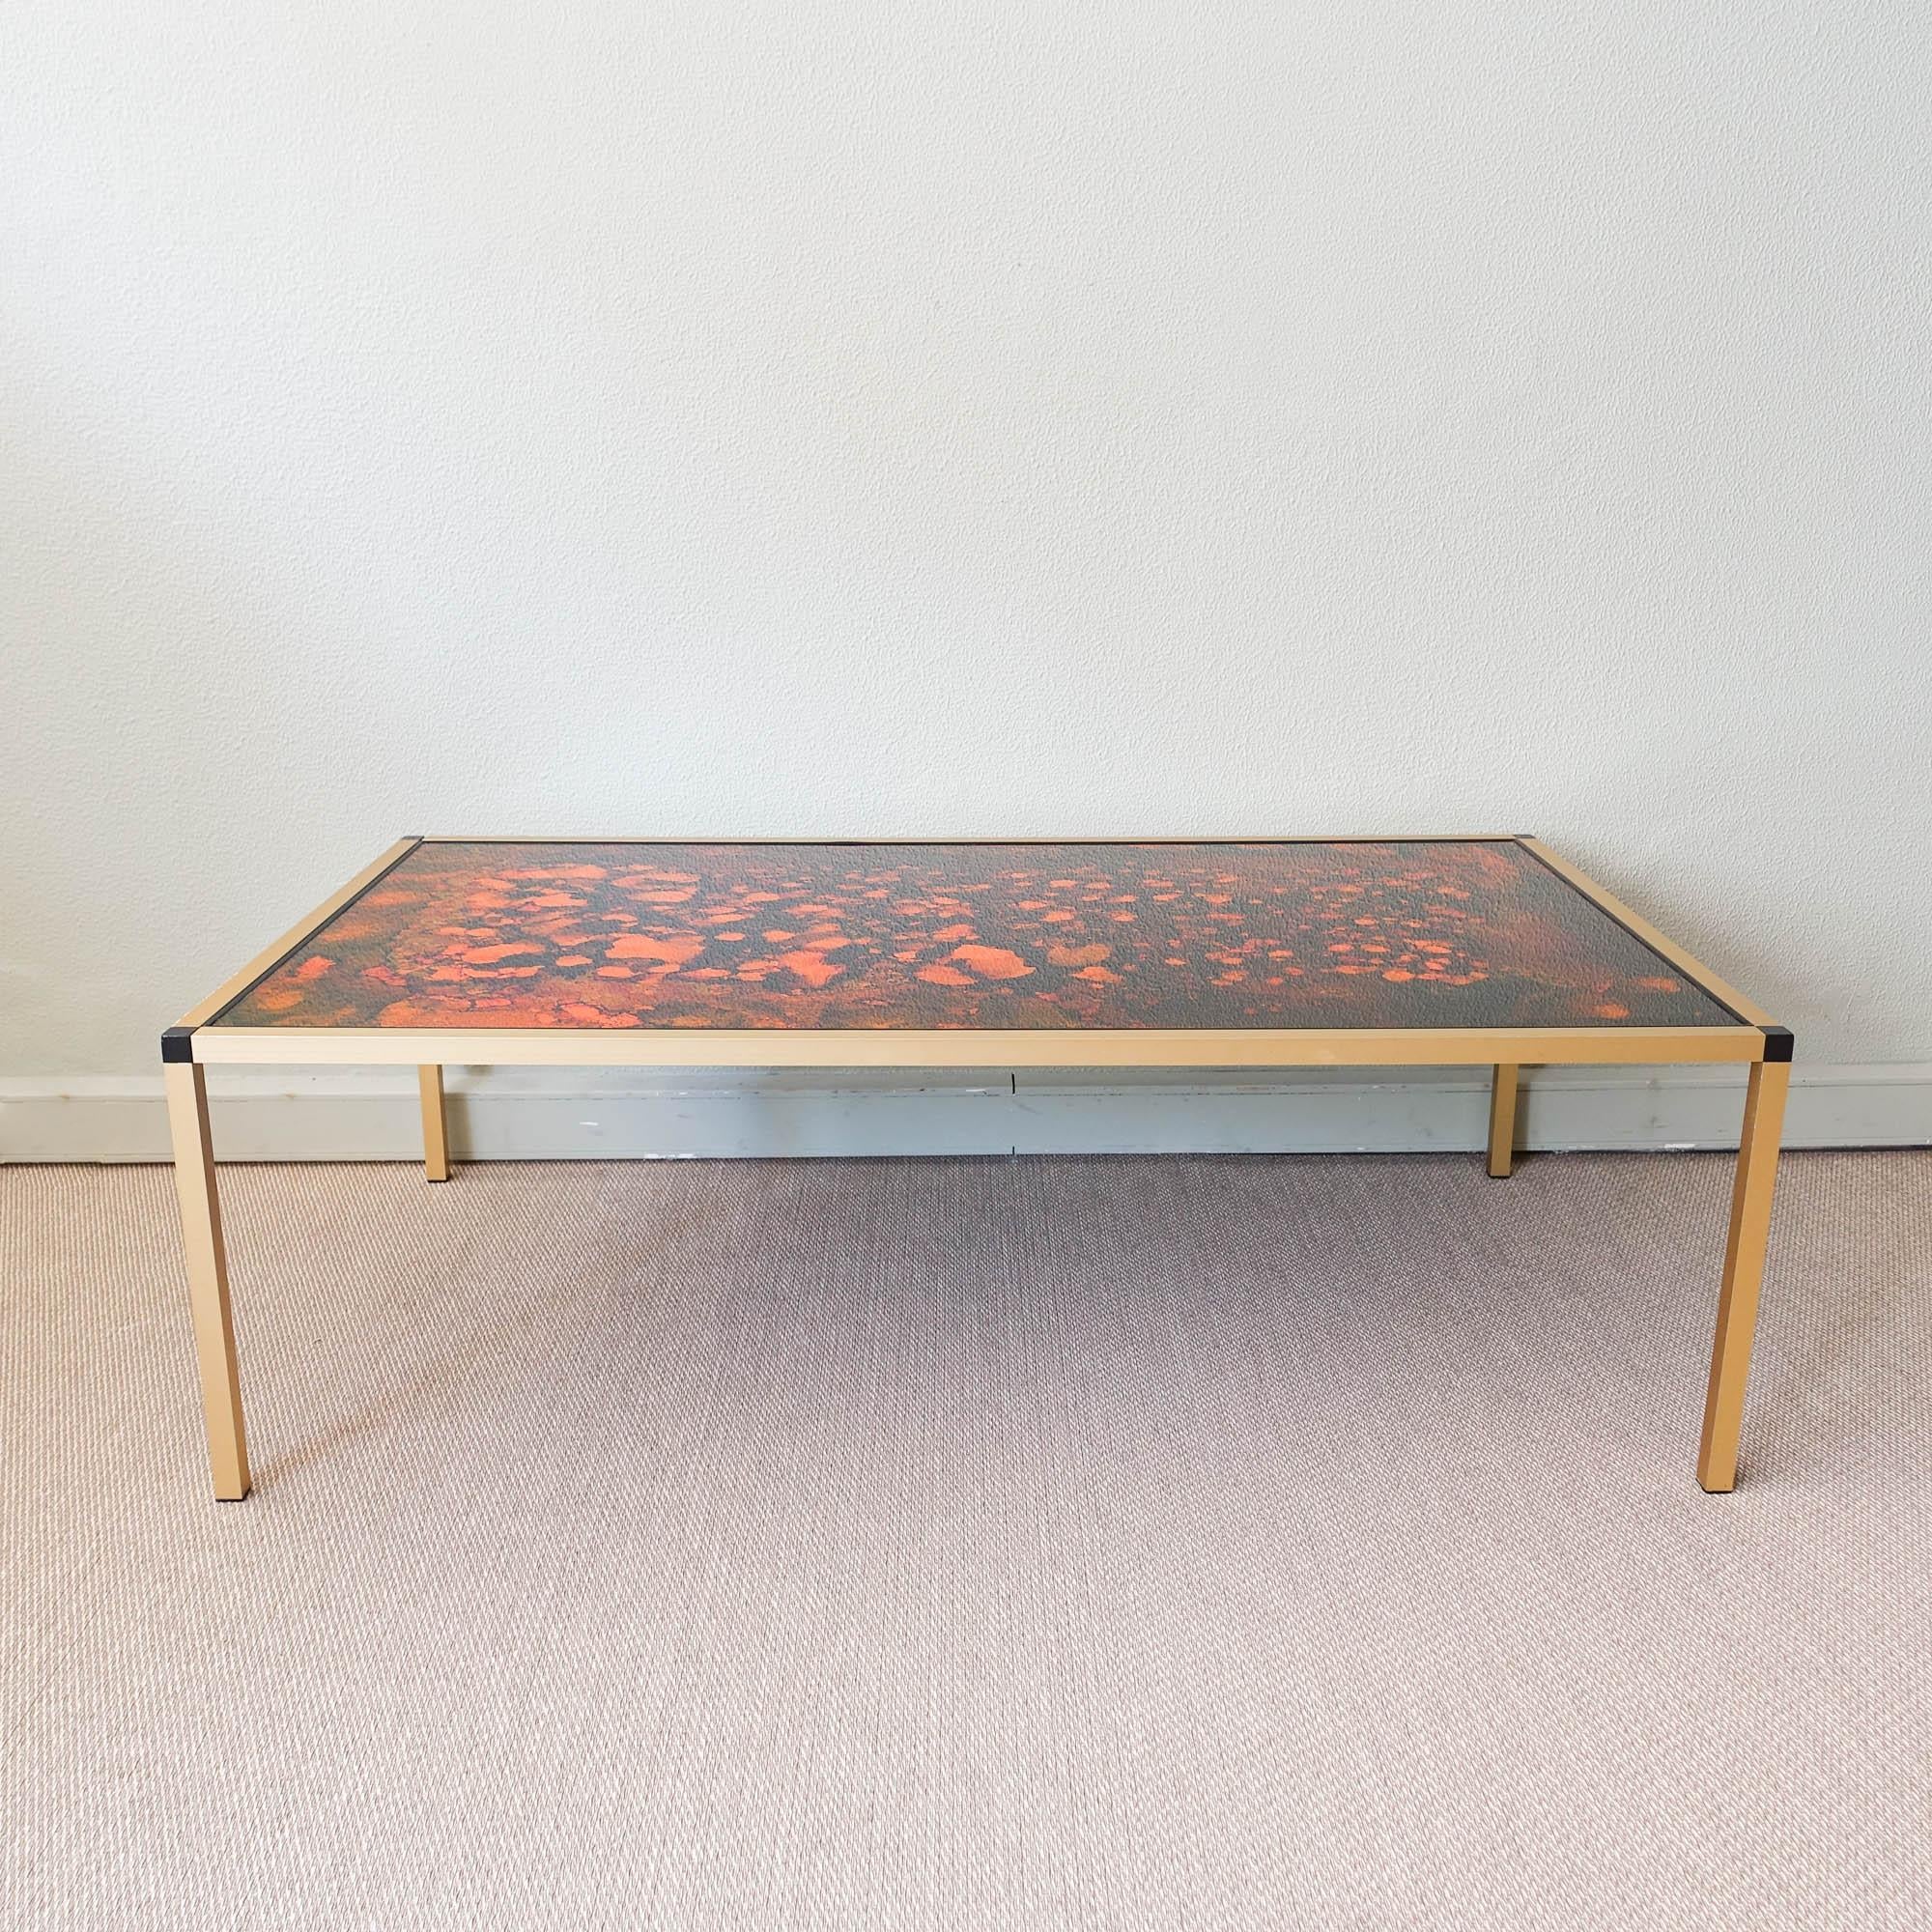 Introduce a unique and stylish addition to your living room with this stunning Danish Lava pattern coffee table from the 1970s. Manufactured in Denmark, it boasts a gold aluminum frame and black feet, which create a striking contrast against the